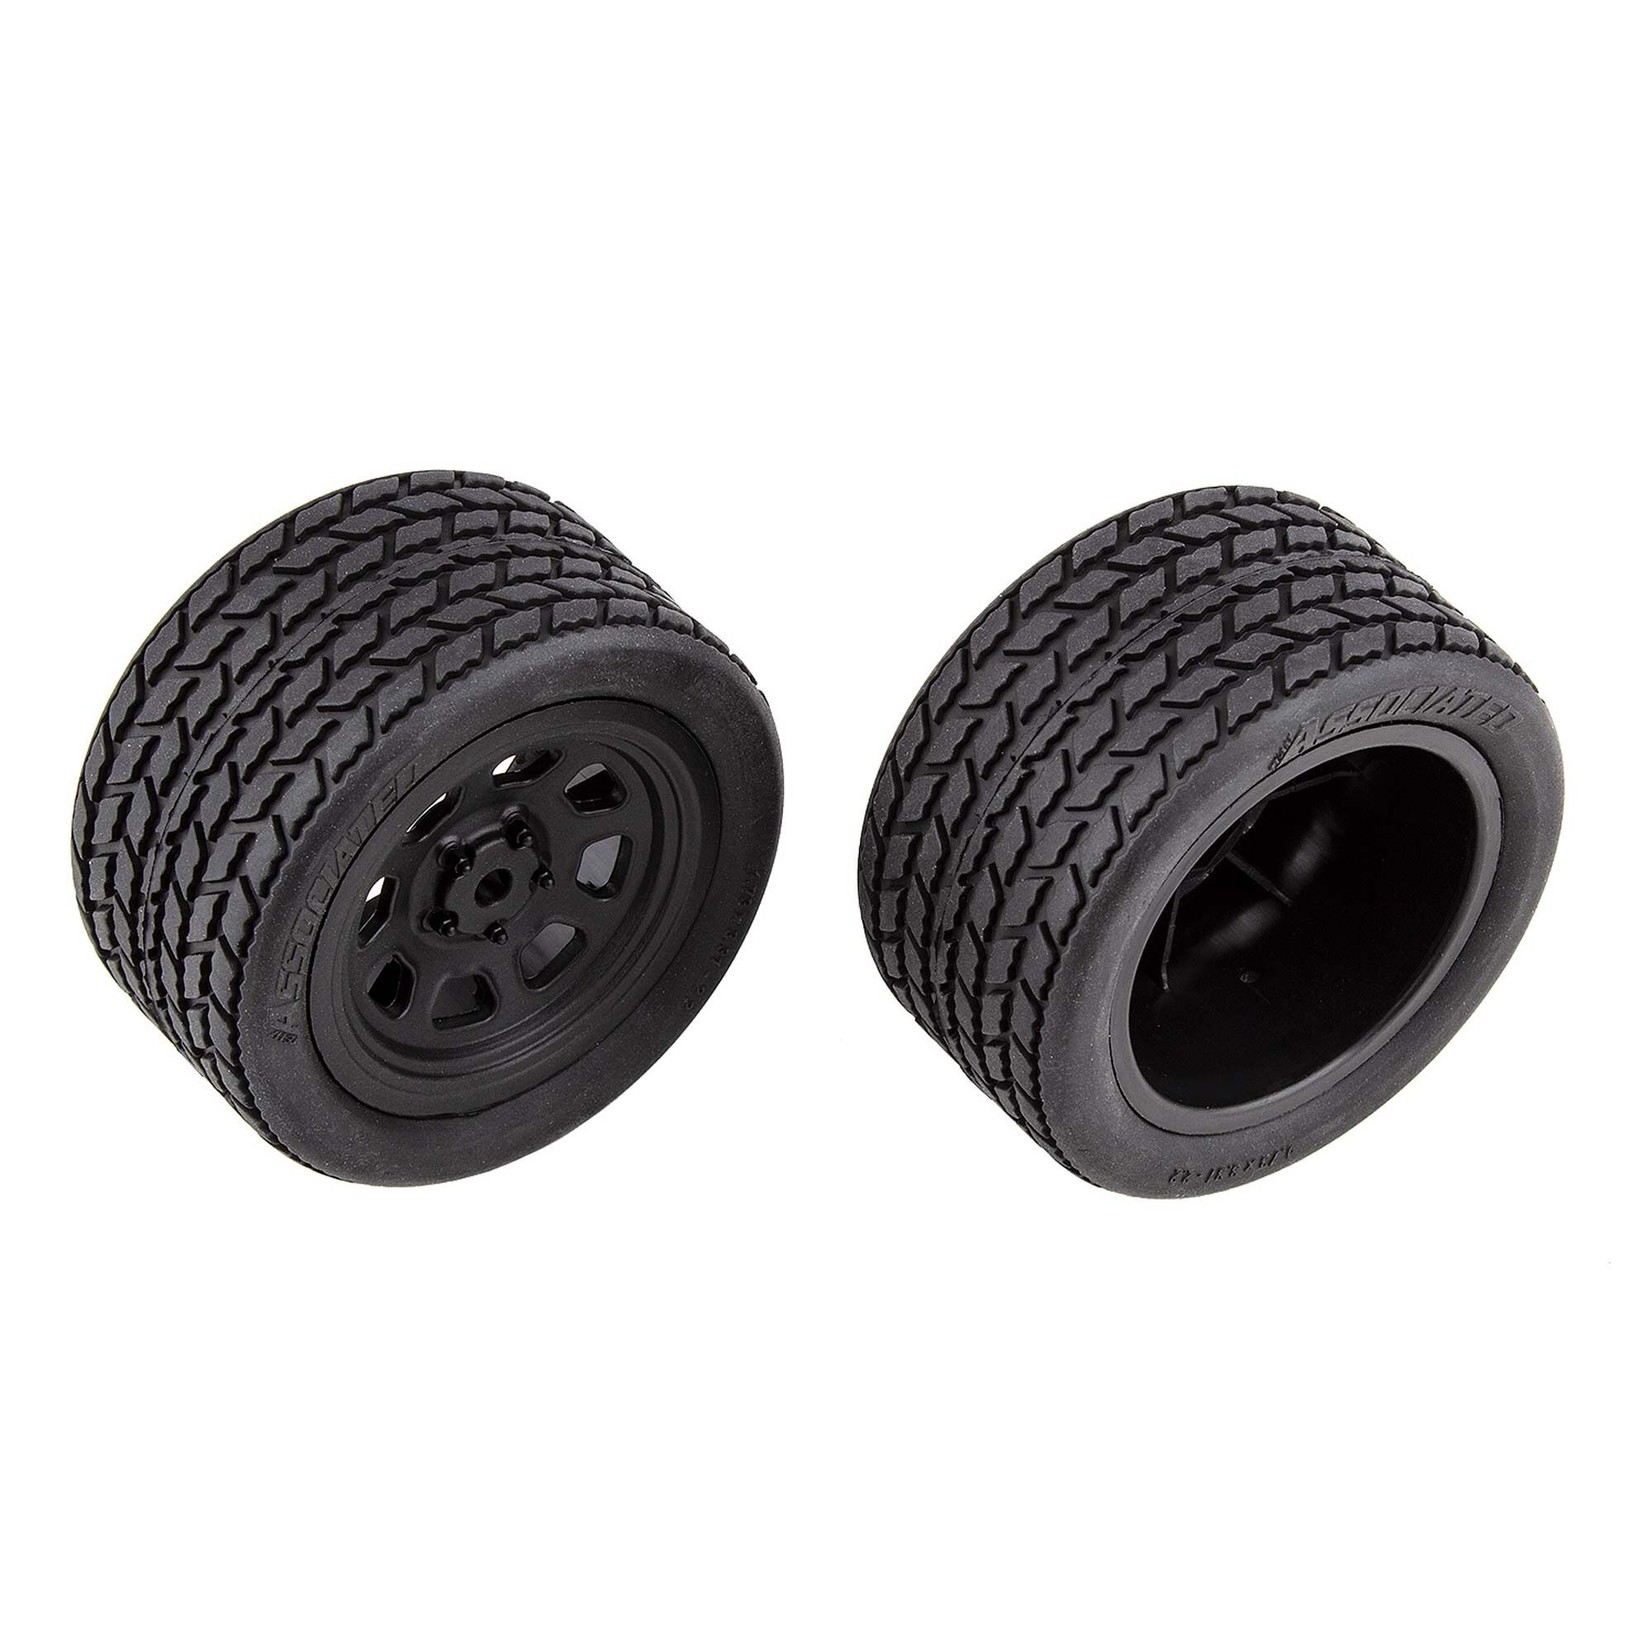 Team Associated SR10 Rear Wheels with Street Stock Tires, mounted